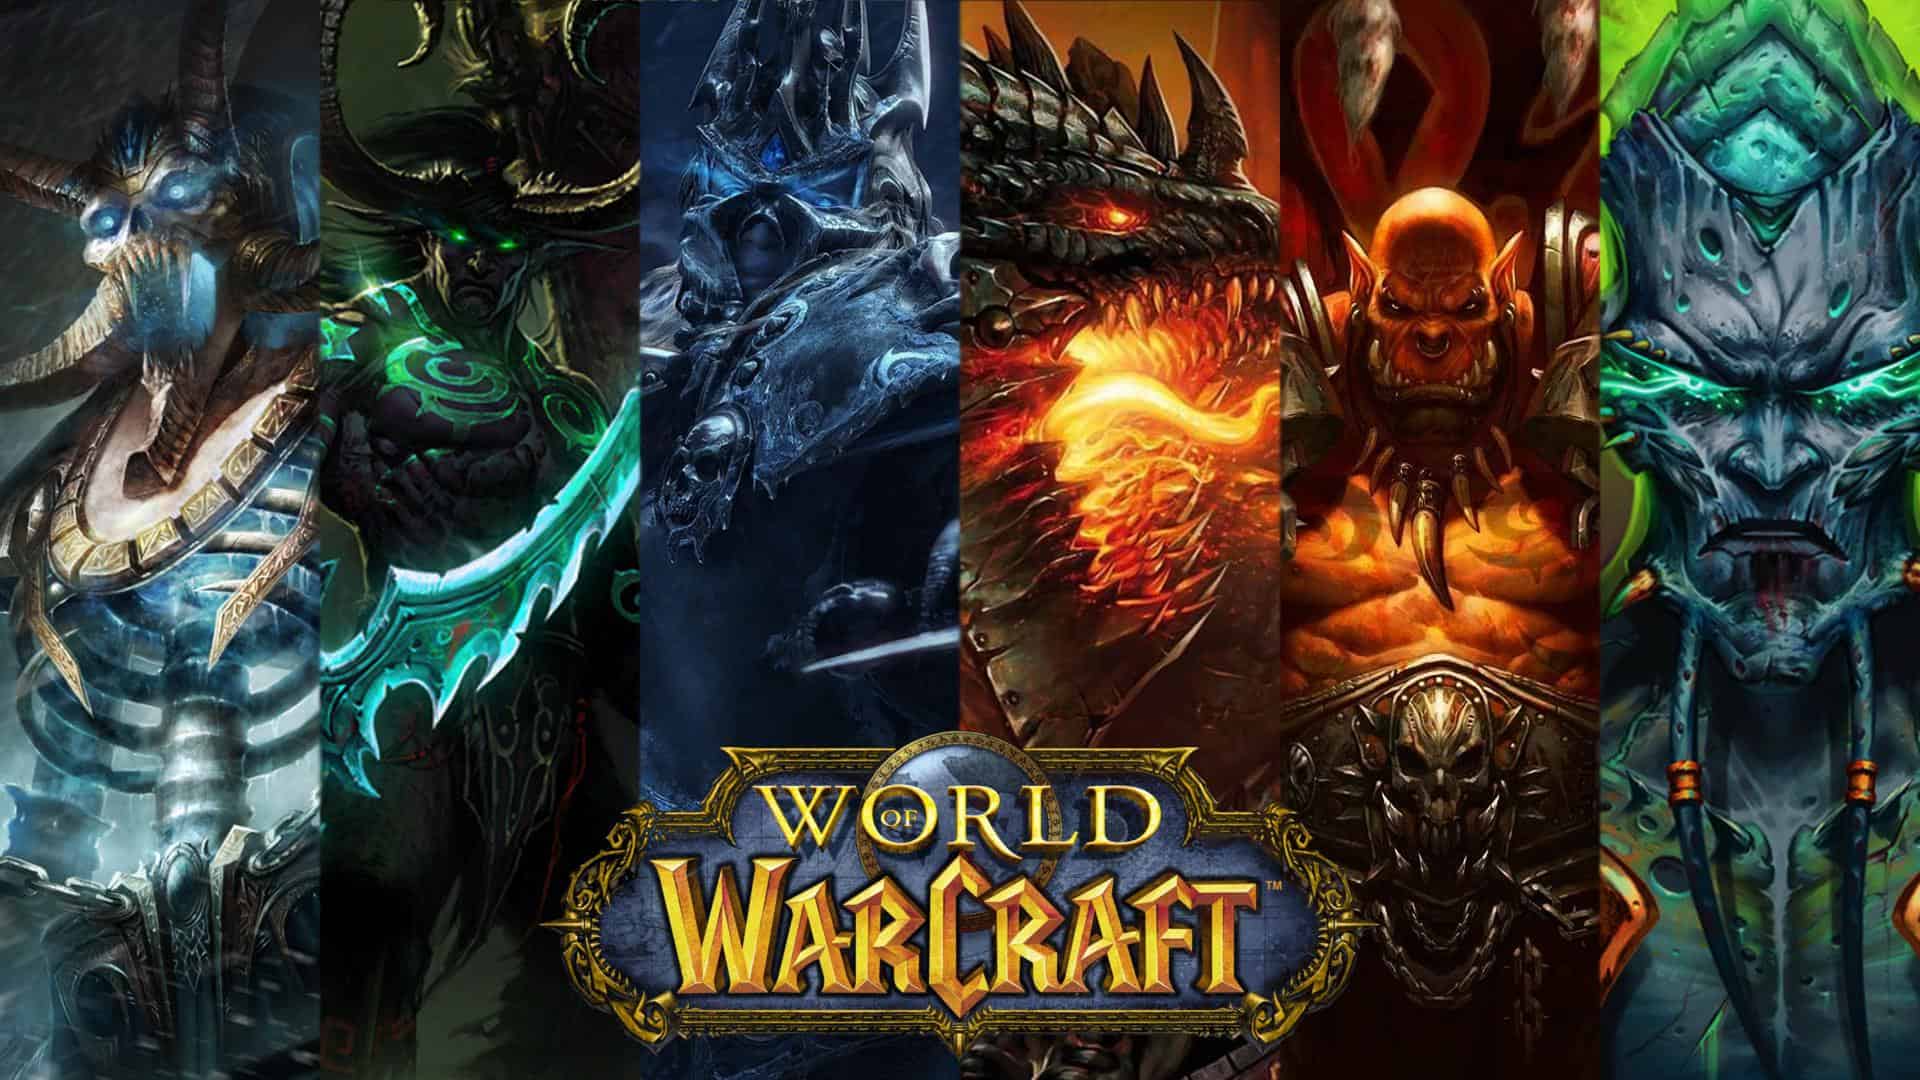 WoW Alternatives: 10 MMO RPG Games Like World of Warcraft